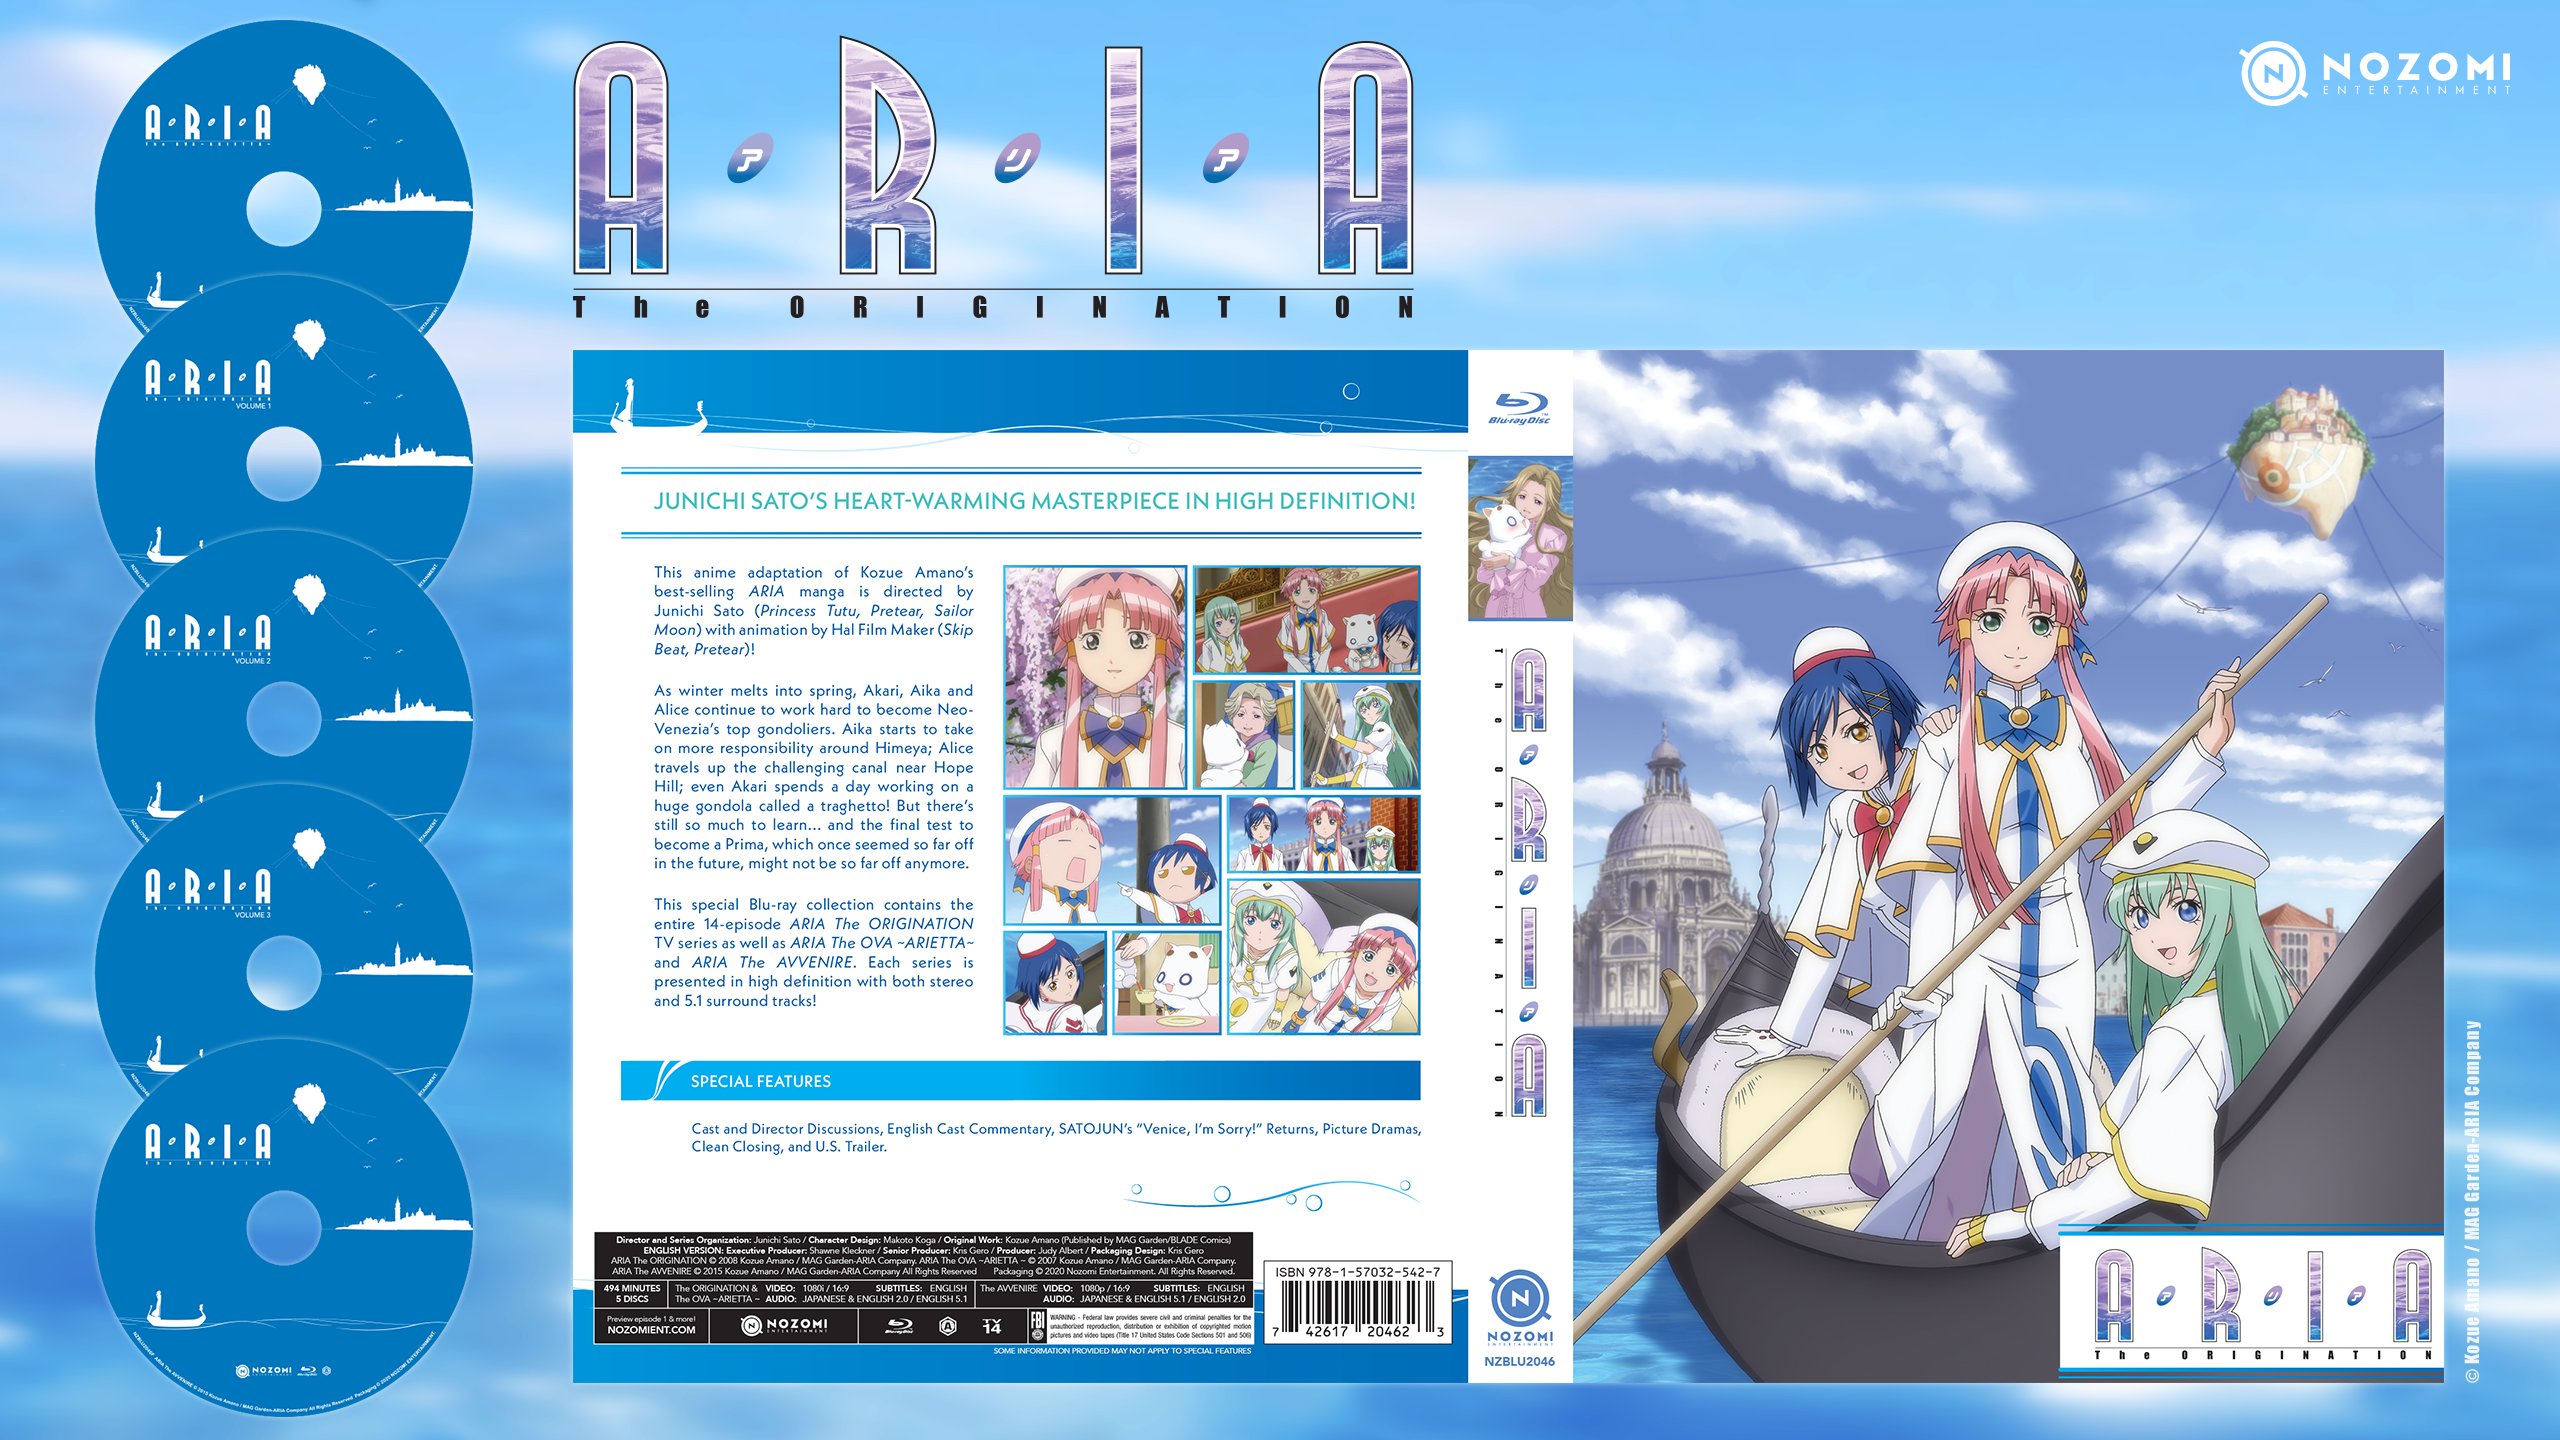 Nozomi Entertainment Package Reveal Aria The Origination Contains Episodes 1 13 And 5 5 Of The Anime S Third Season Directed By Junichi Sato As Well As Aria The Ova Arietta And Episodes